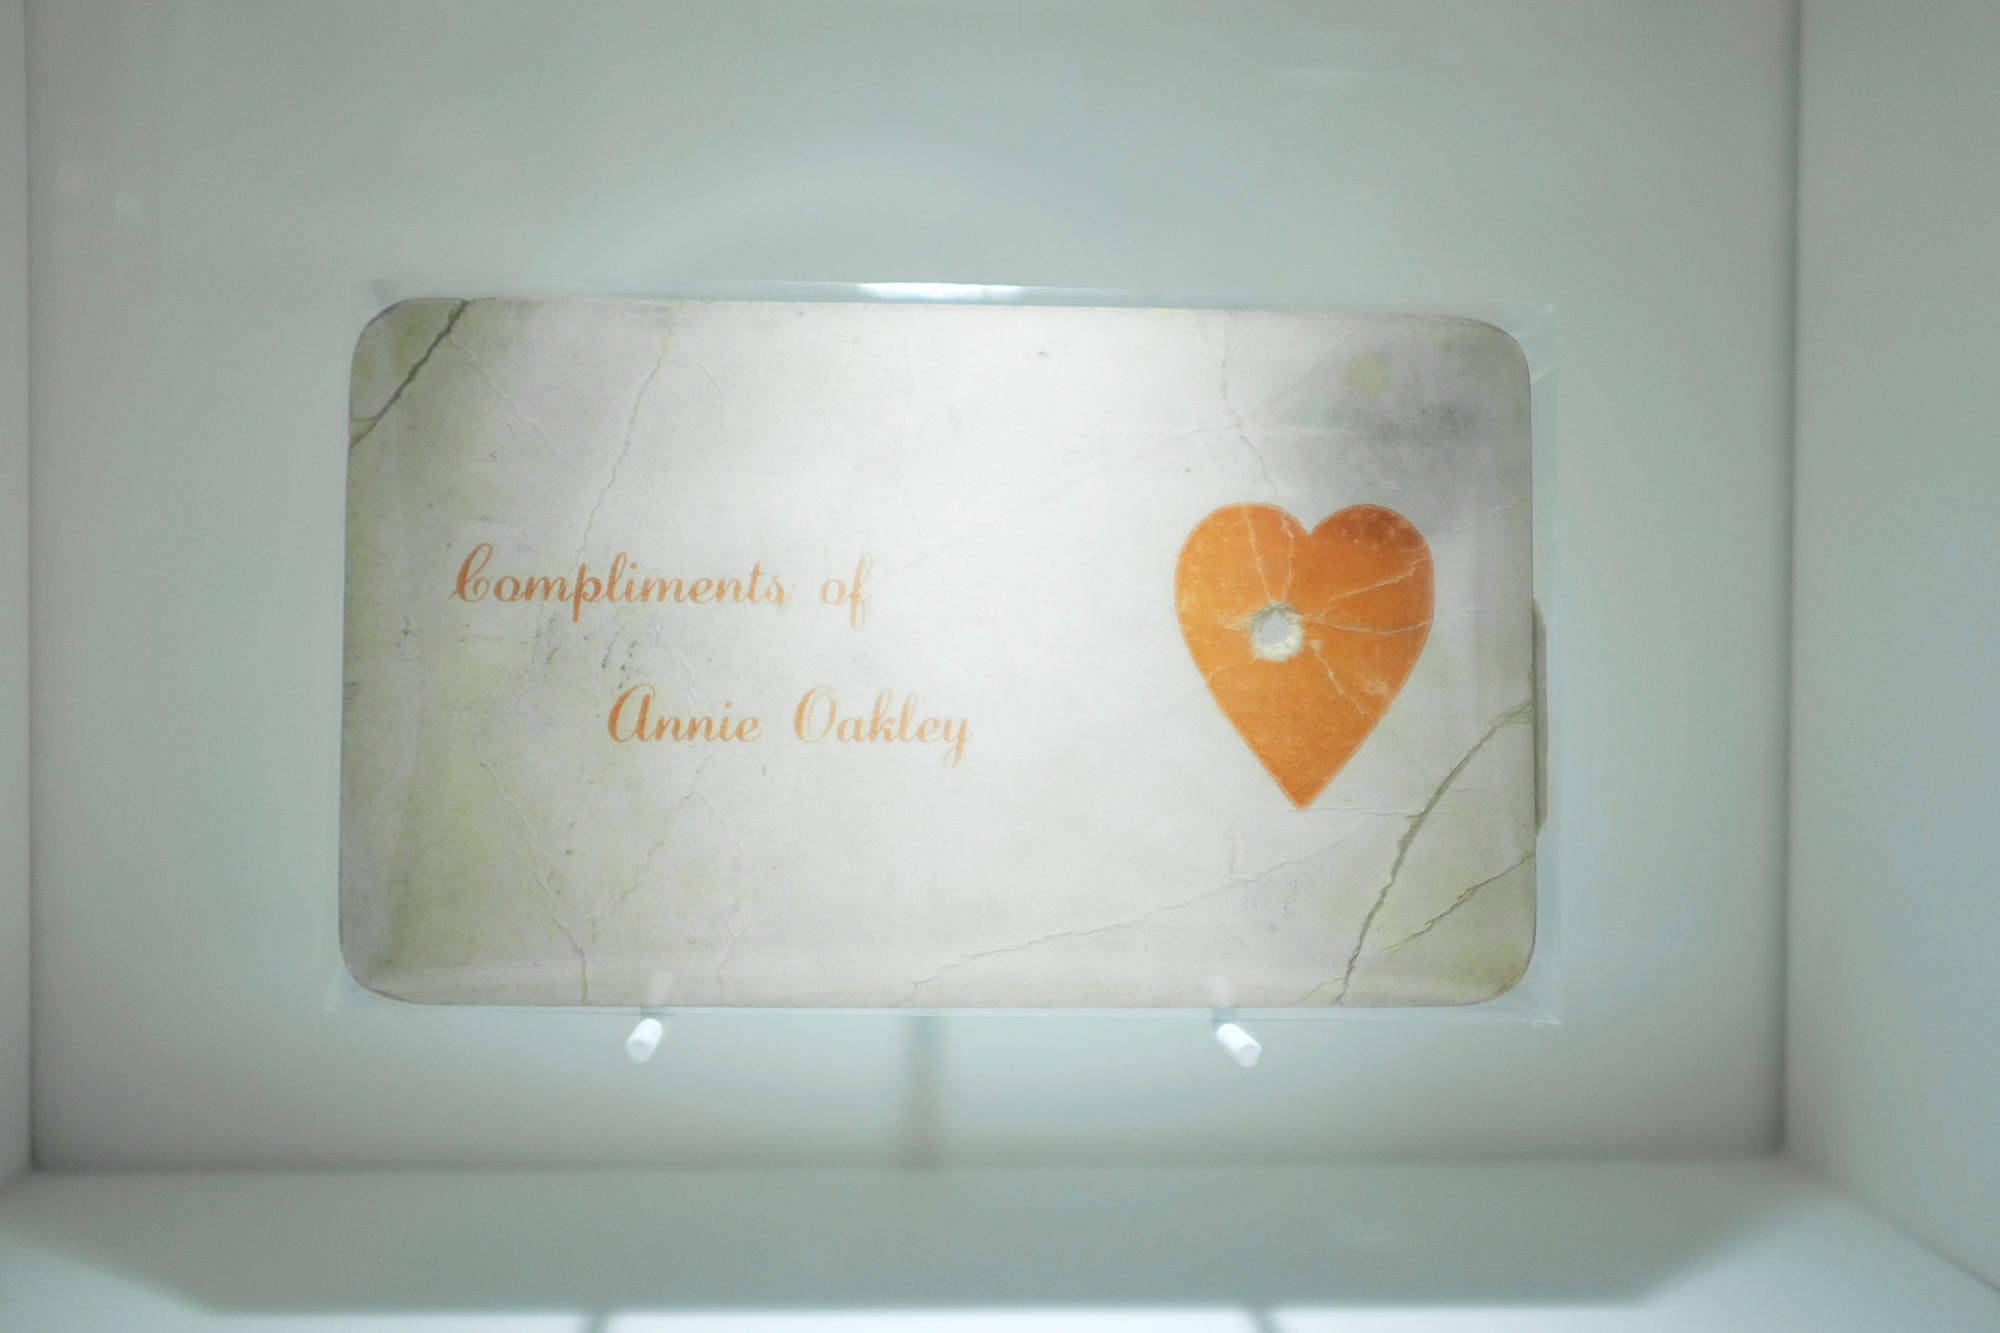 Annie Oakley card with a bullet hole in the heart